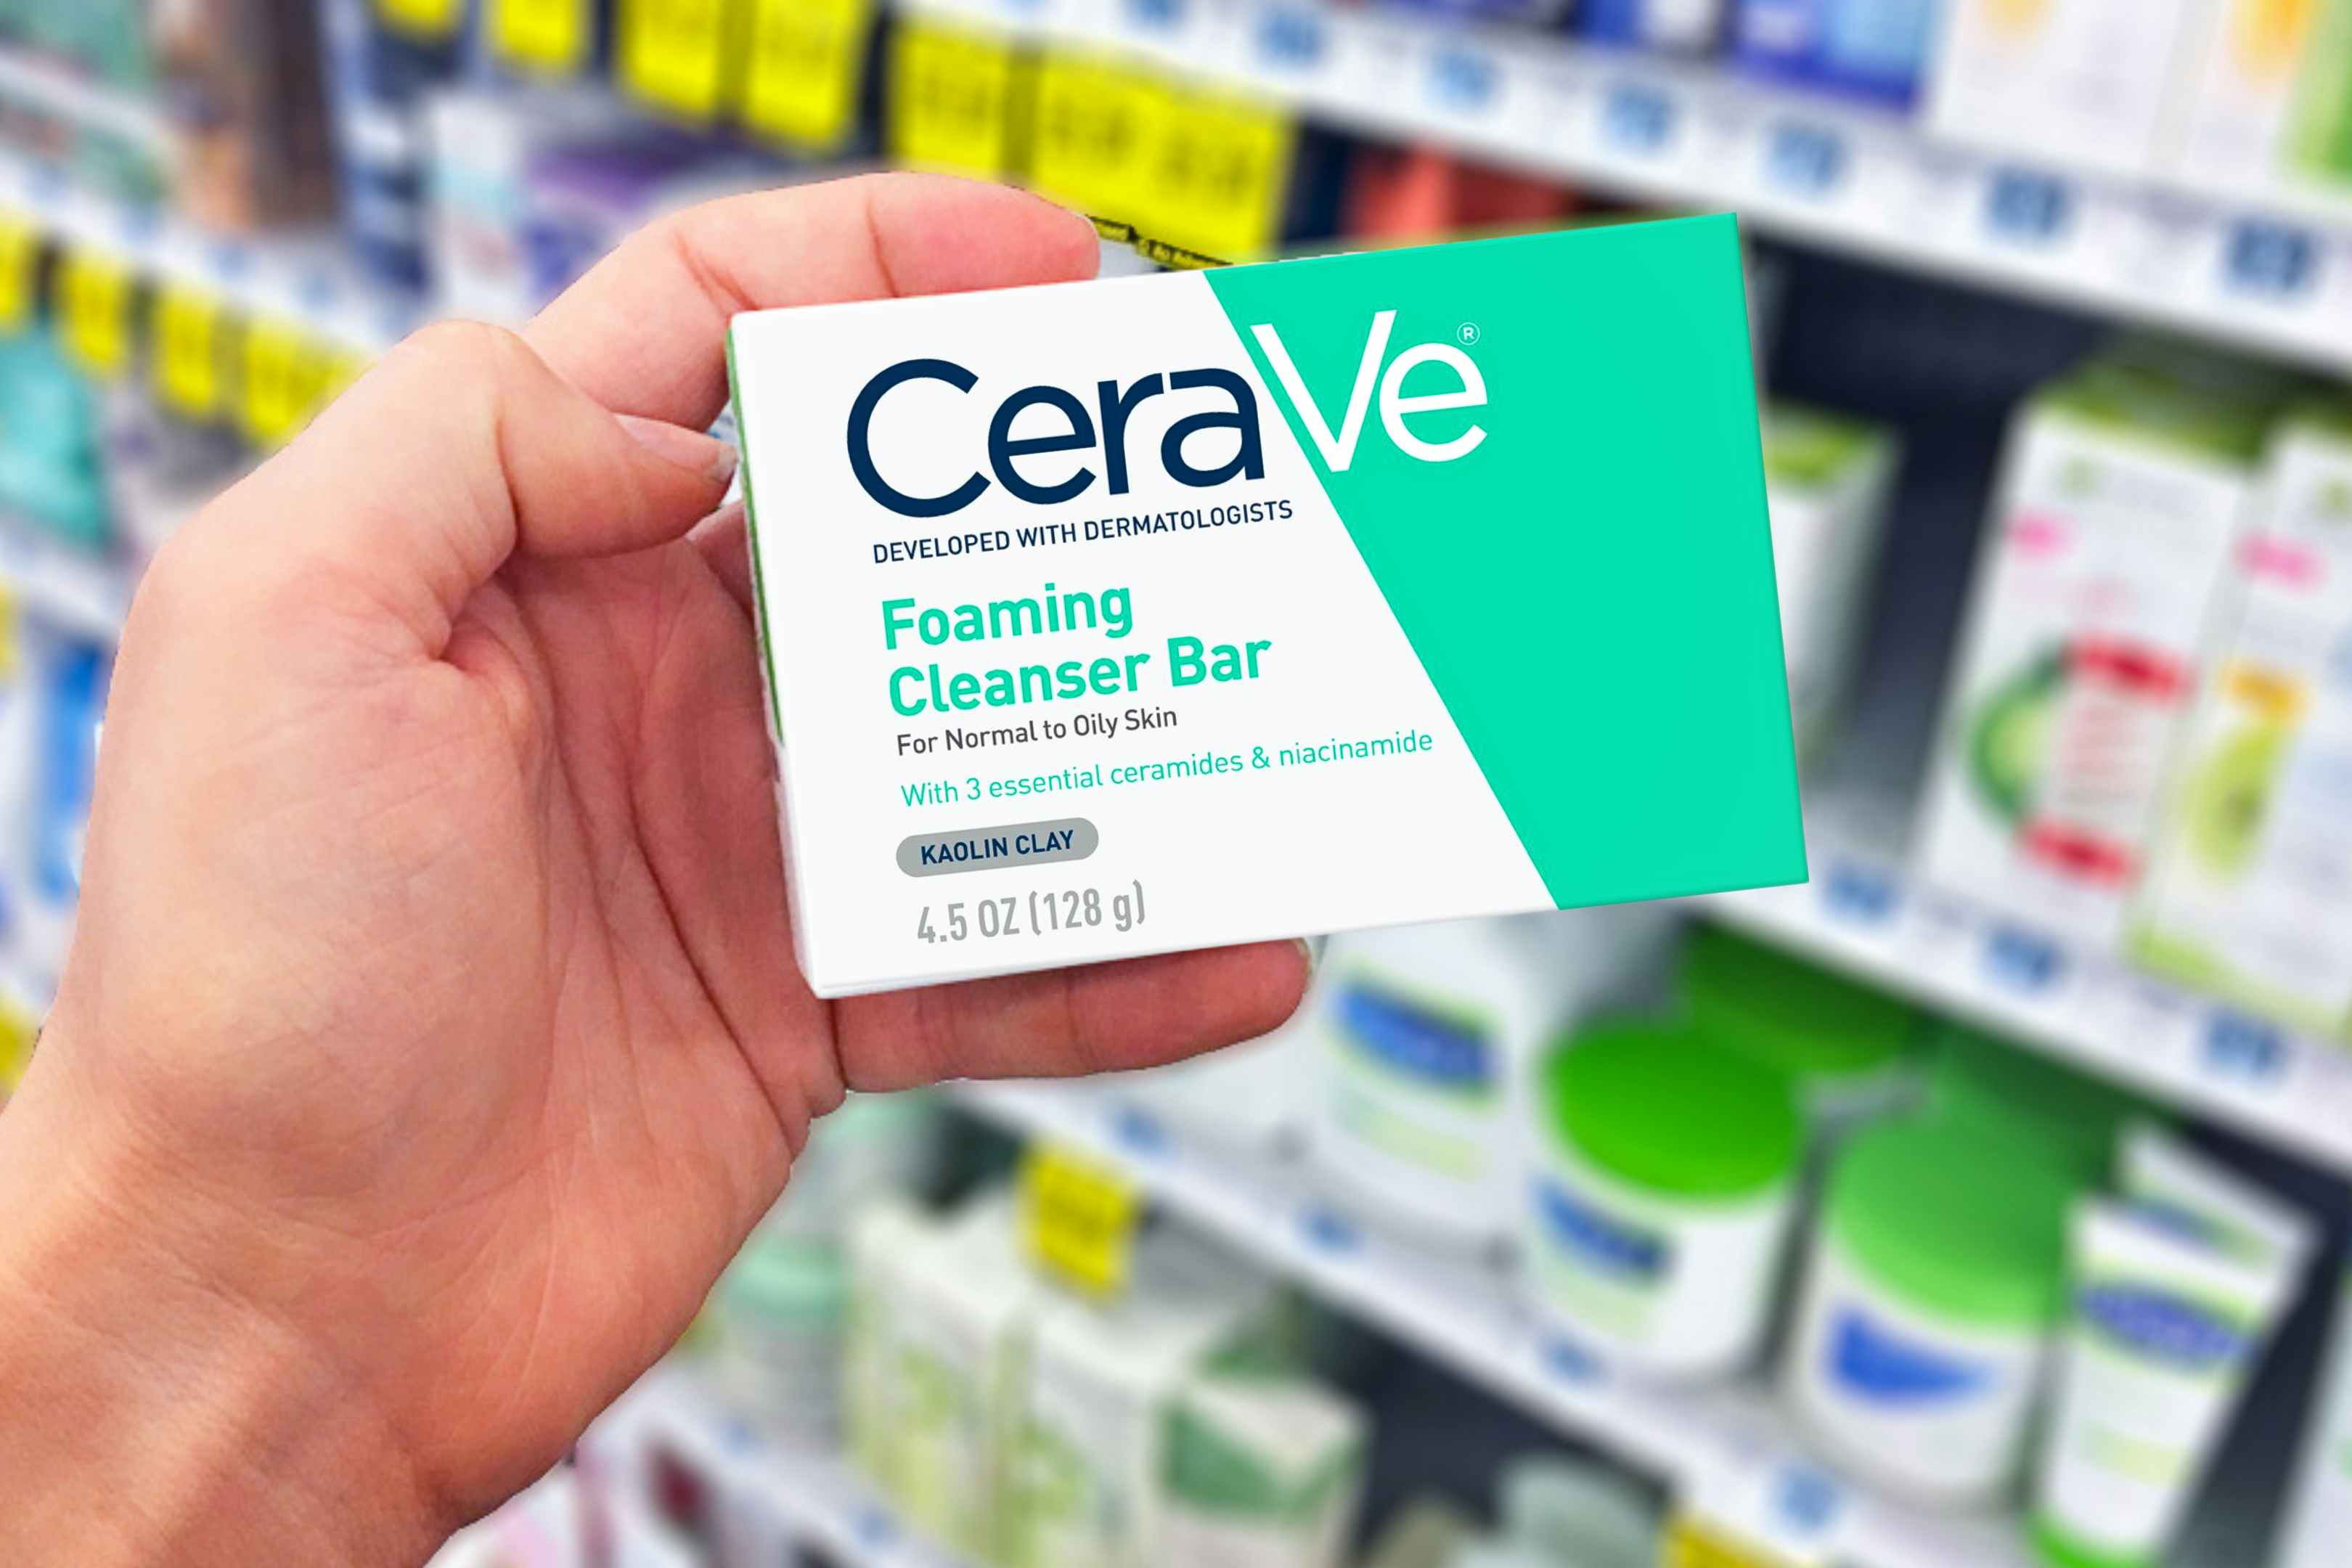 Better-Than-Free Deal: Cerave Foaming Cleansing Bar at CVS